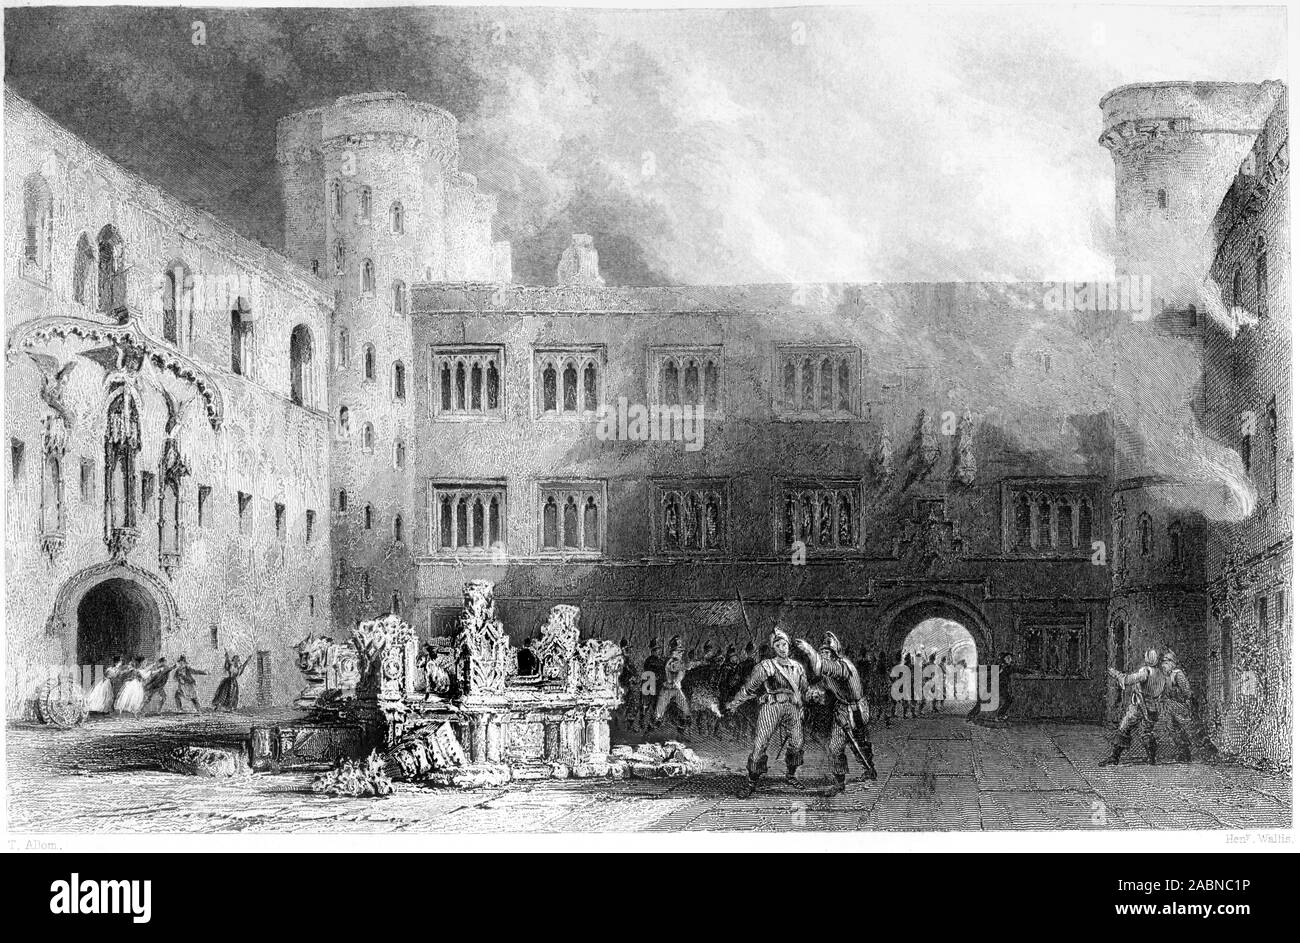 An engraving of the Inner Court of the Palace of Linlithgow scanned at high resolution from a book printed in 1859.  Destroyed by fire in 1746. Stock Photo